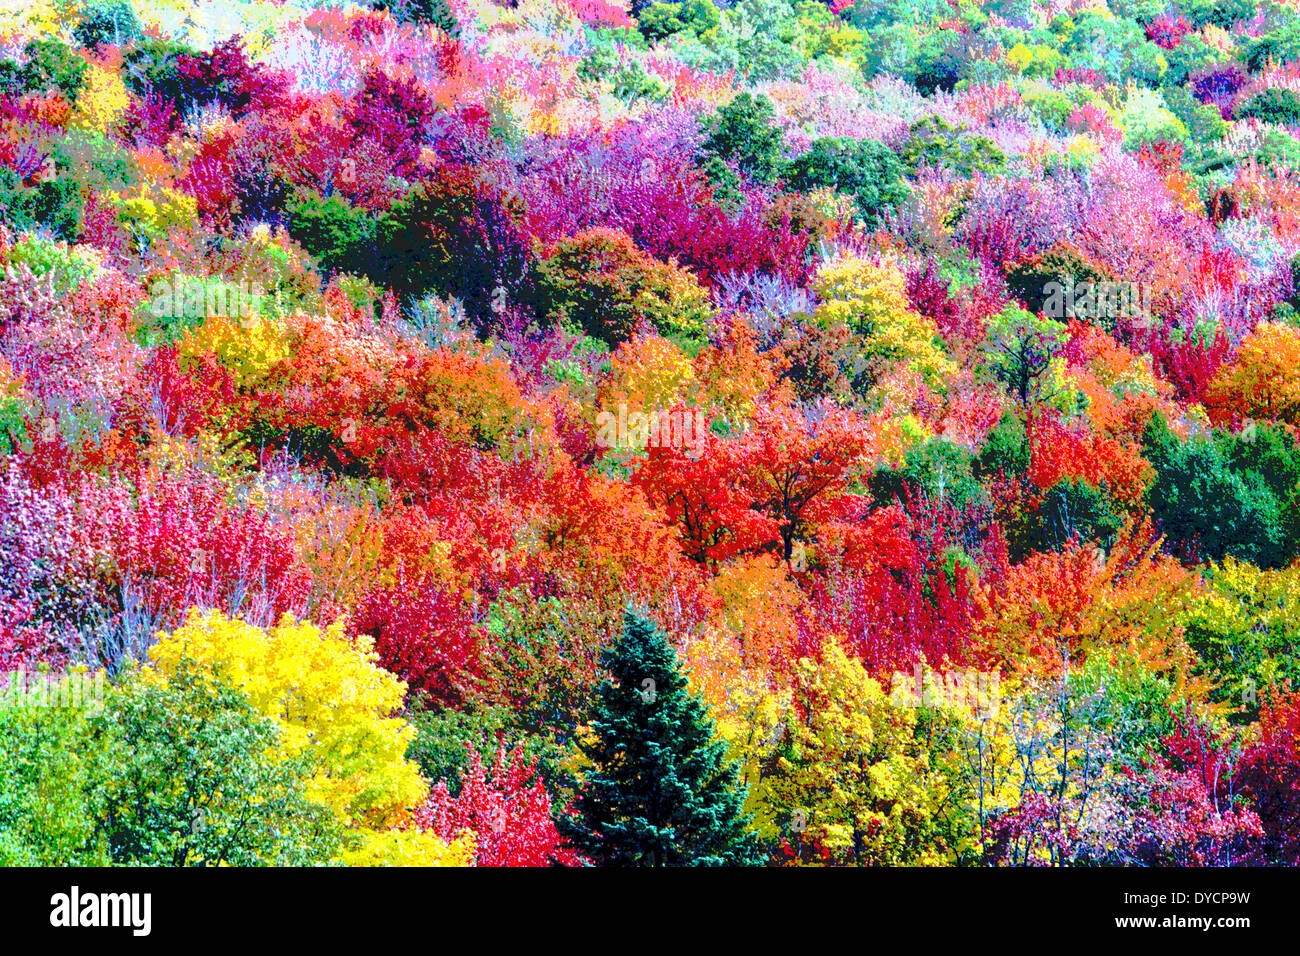 The multicolored leaves of trees during autumn in New England, USA, have been digitally altered to create a vibrant painting of Fall Foliage. Stock Photo